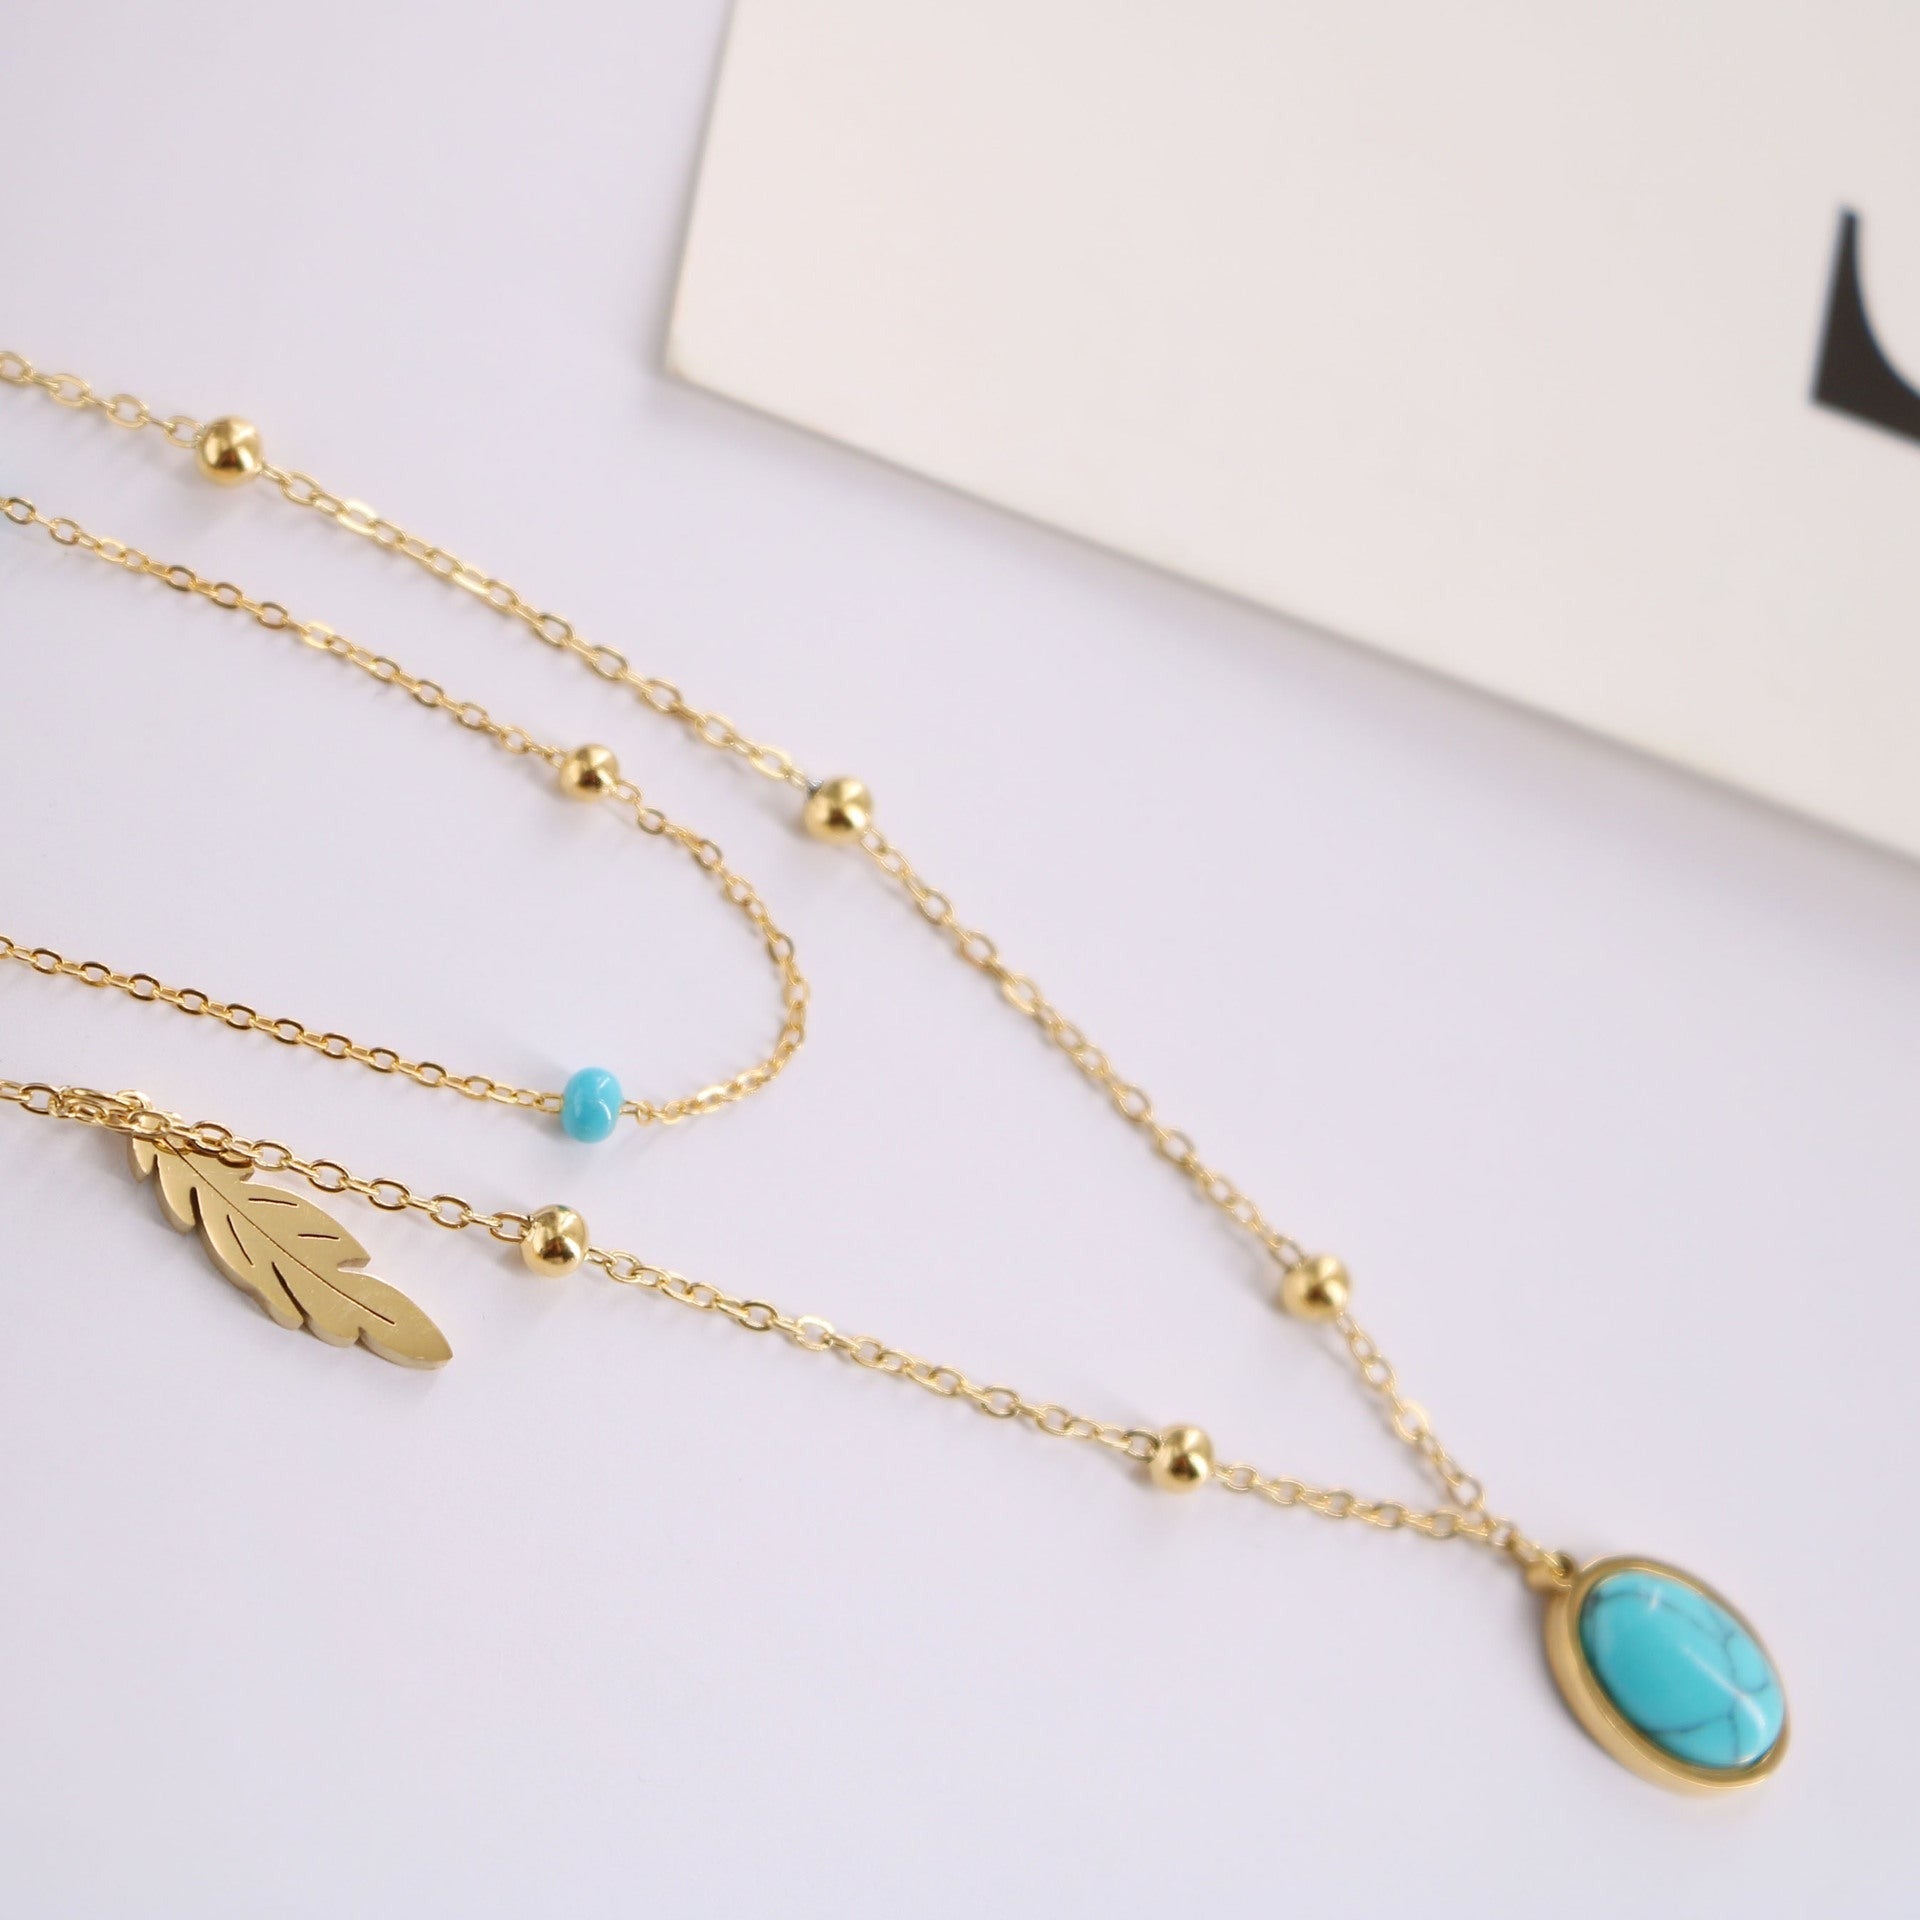 a gold necklace with a turquoise stone and a feather charm